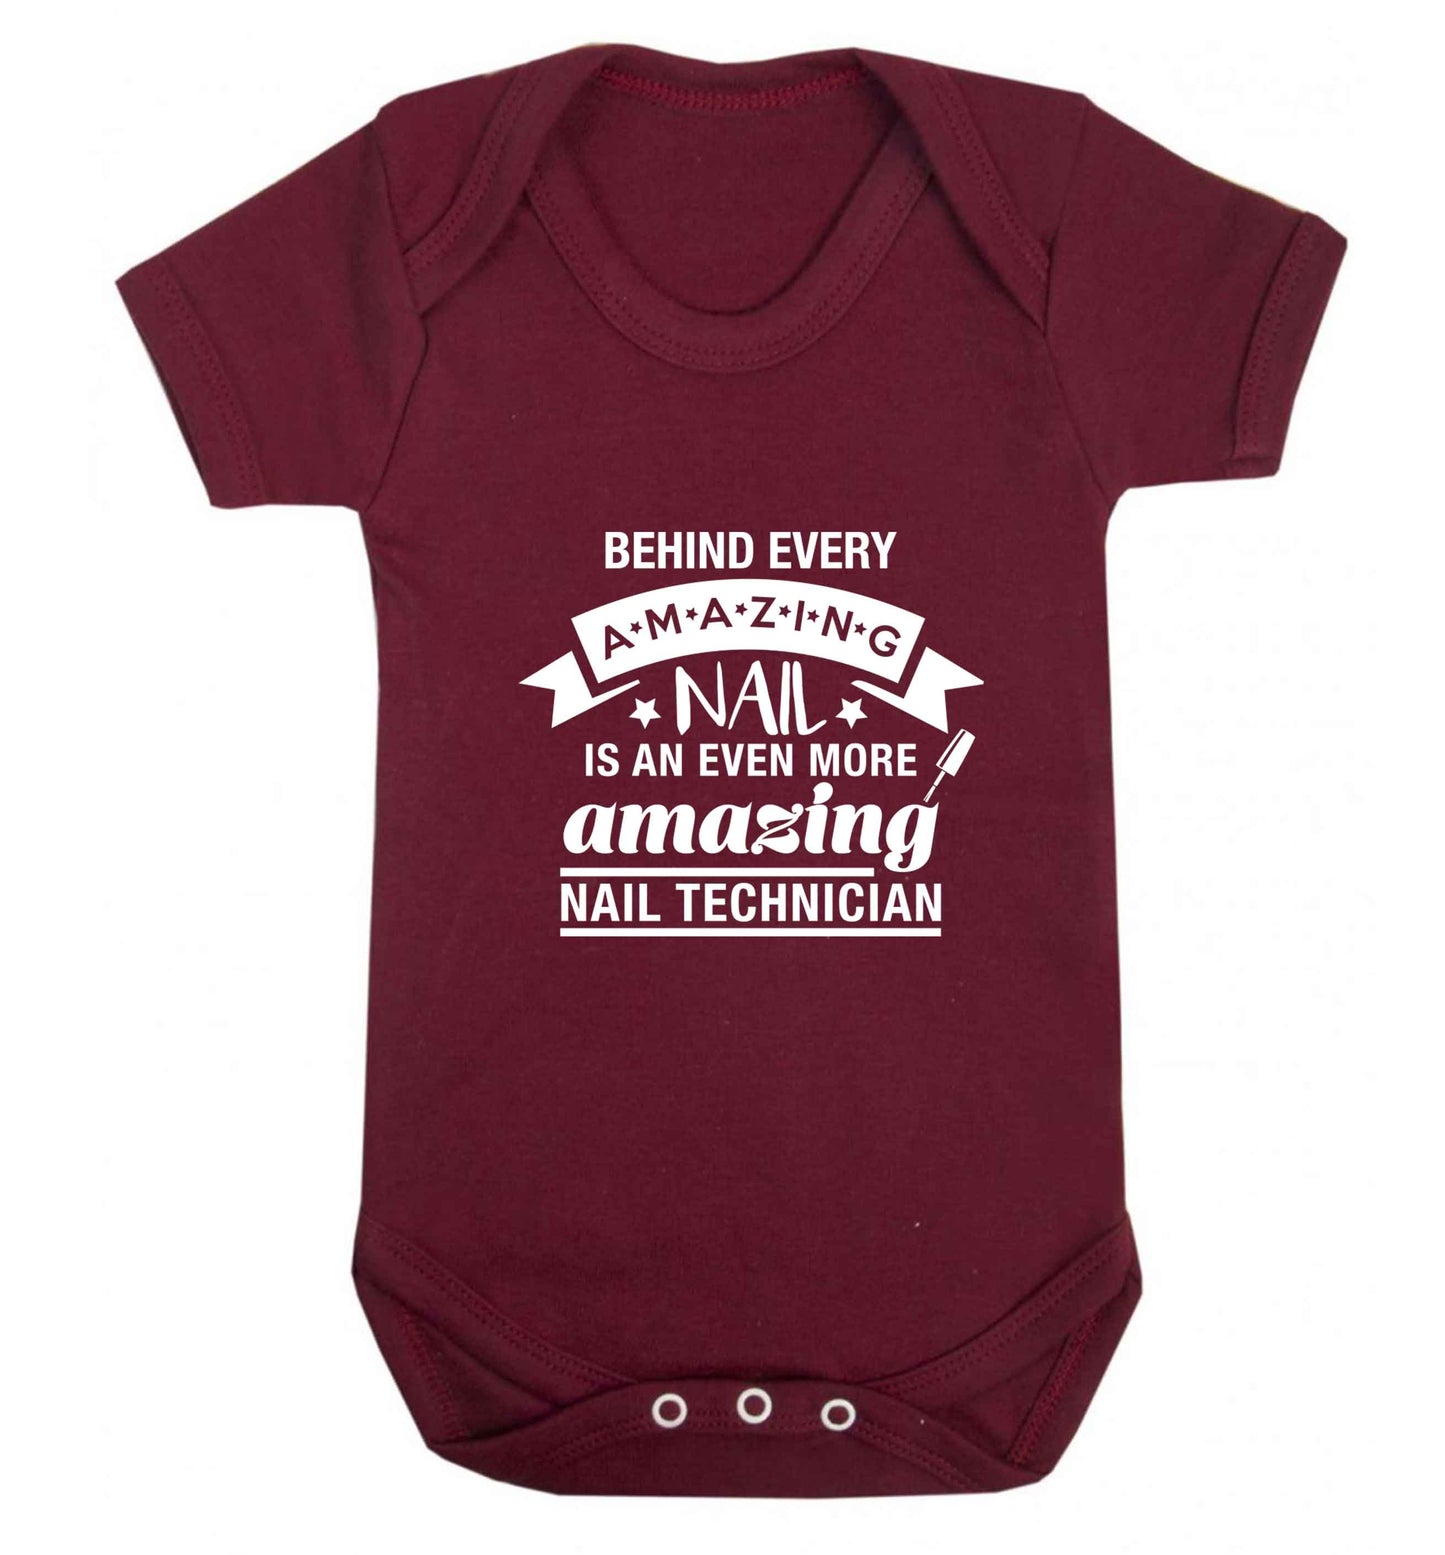 Behind every amazing nail is an even more amazing nail technician baby vest maroon 18-24 months